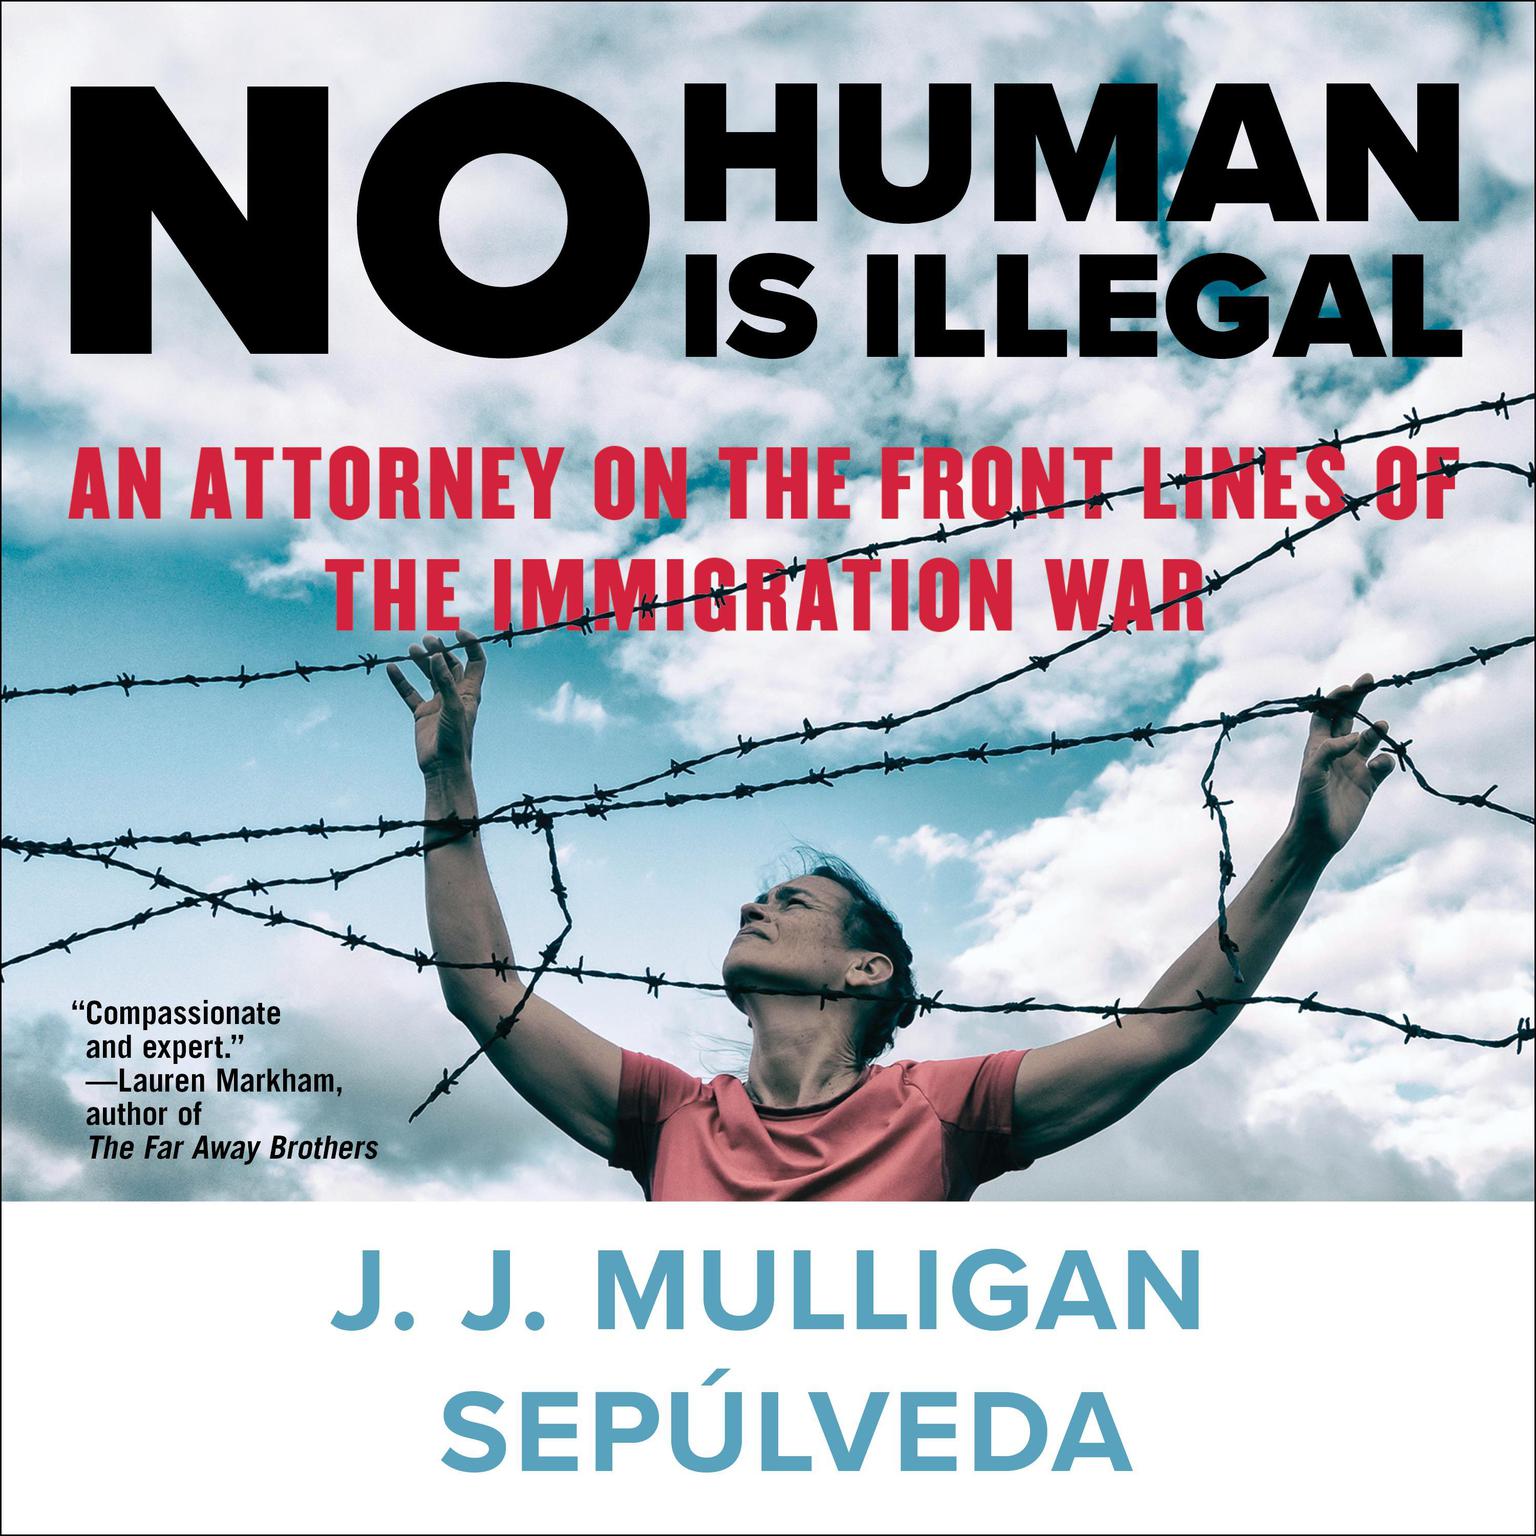 No Human Is Illegal: An Attorney on the Front Lines of the Immigration War Audiobook, by J. J. Mulligan Sepulveda